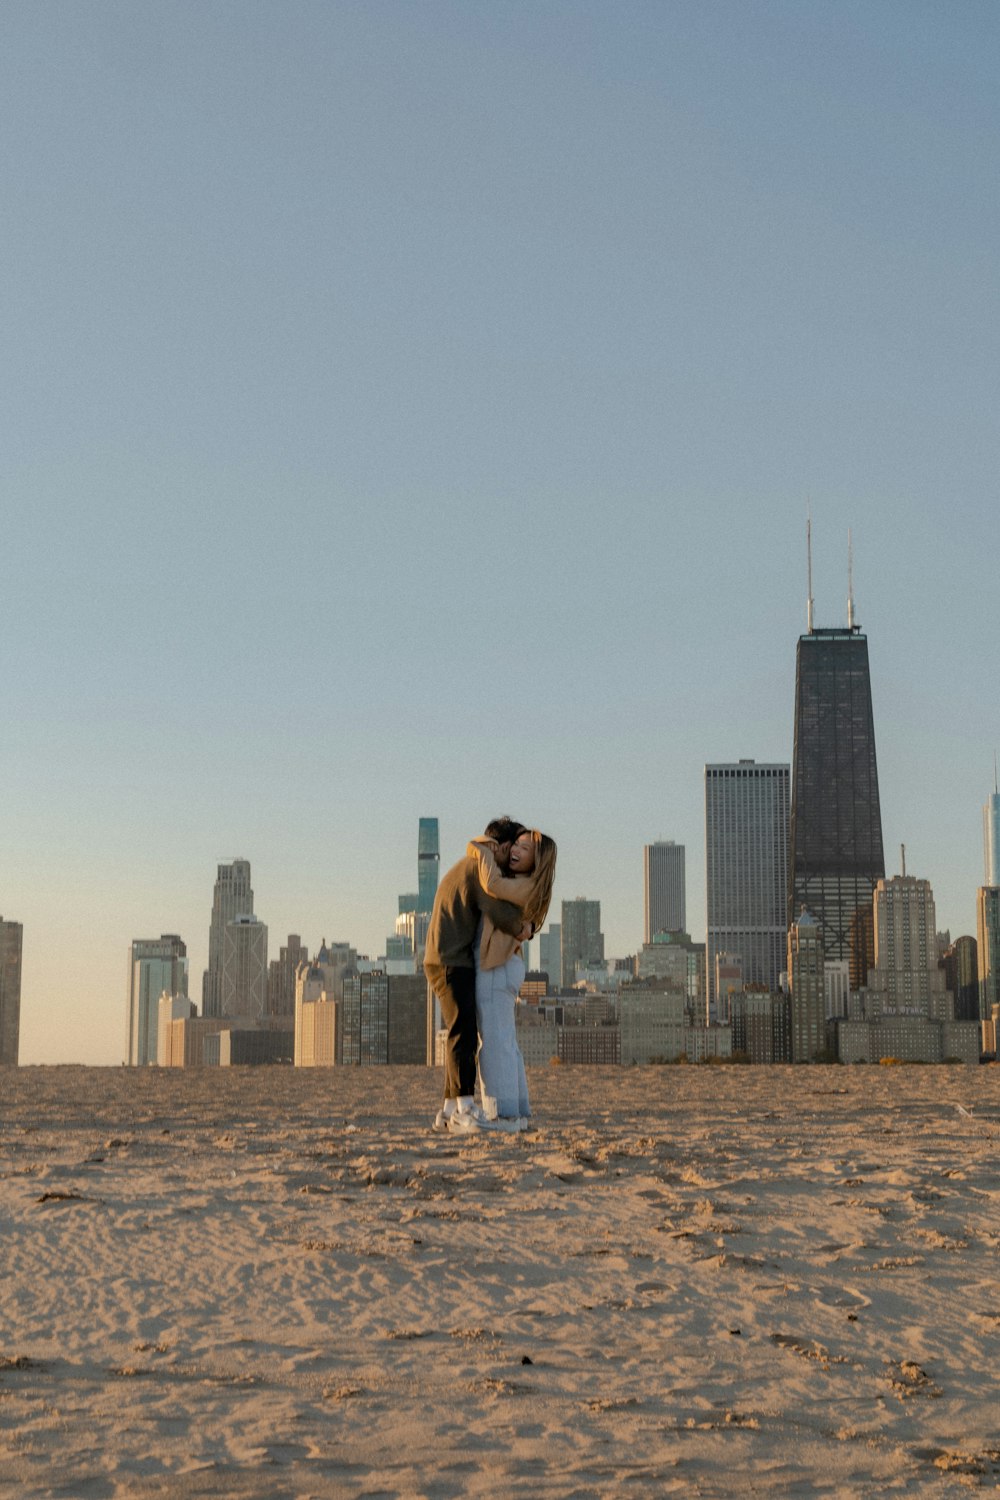 a man and woman kissing on a beach with a city in the background